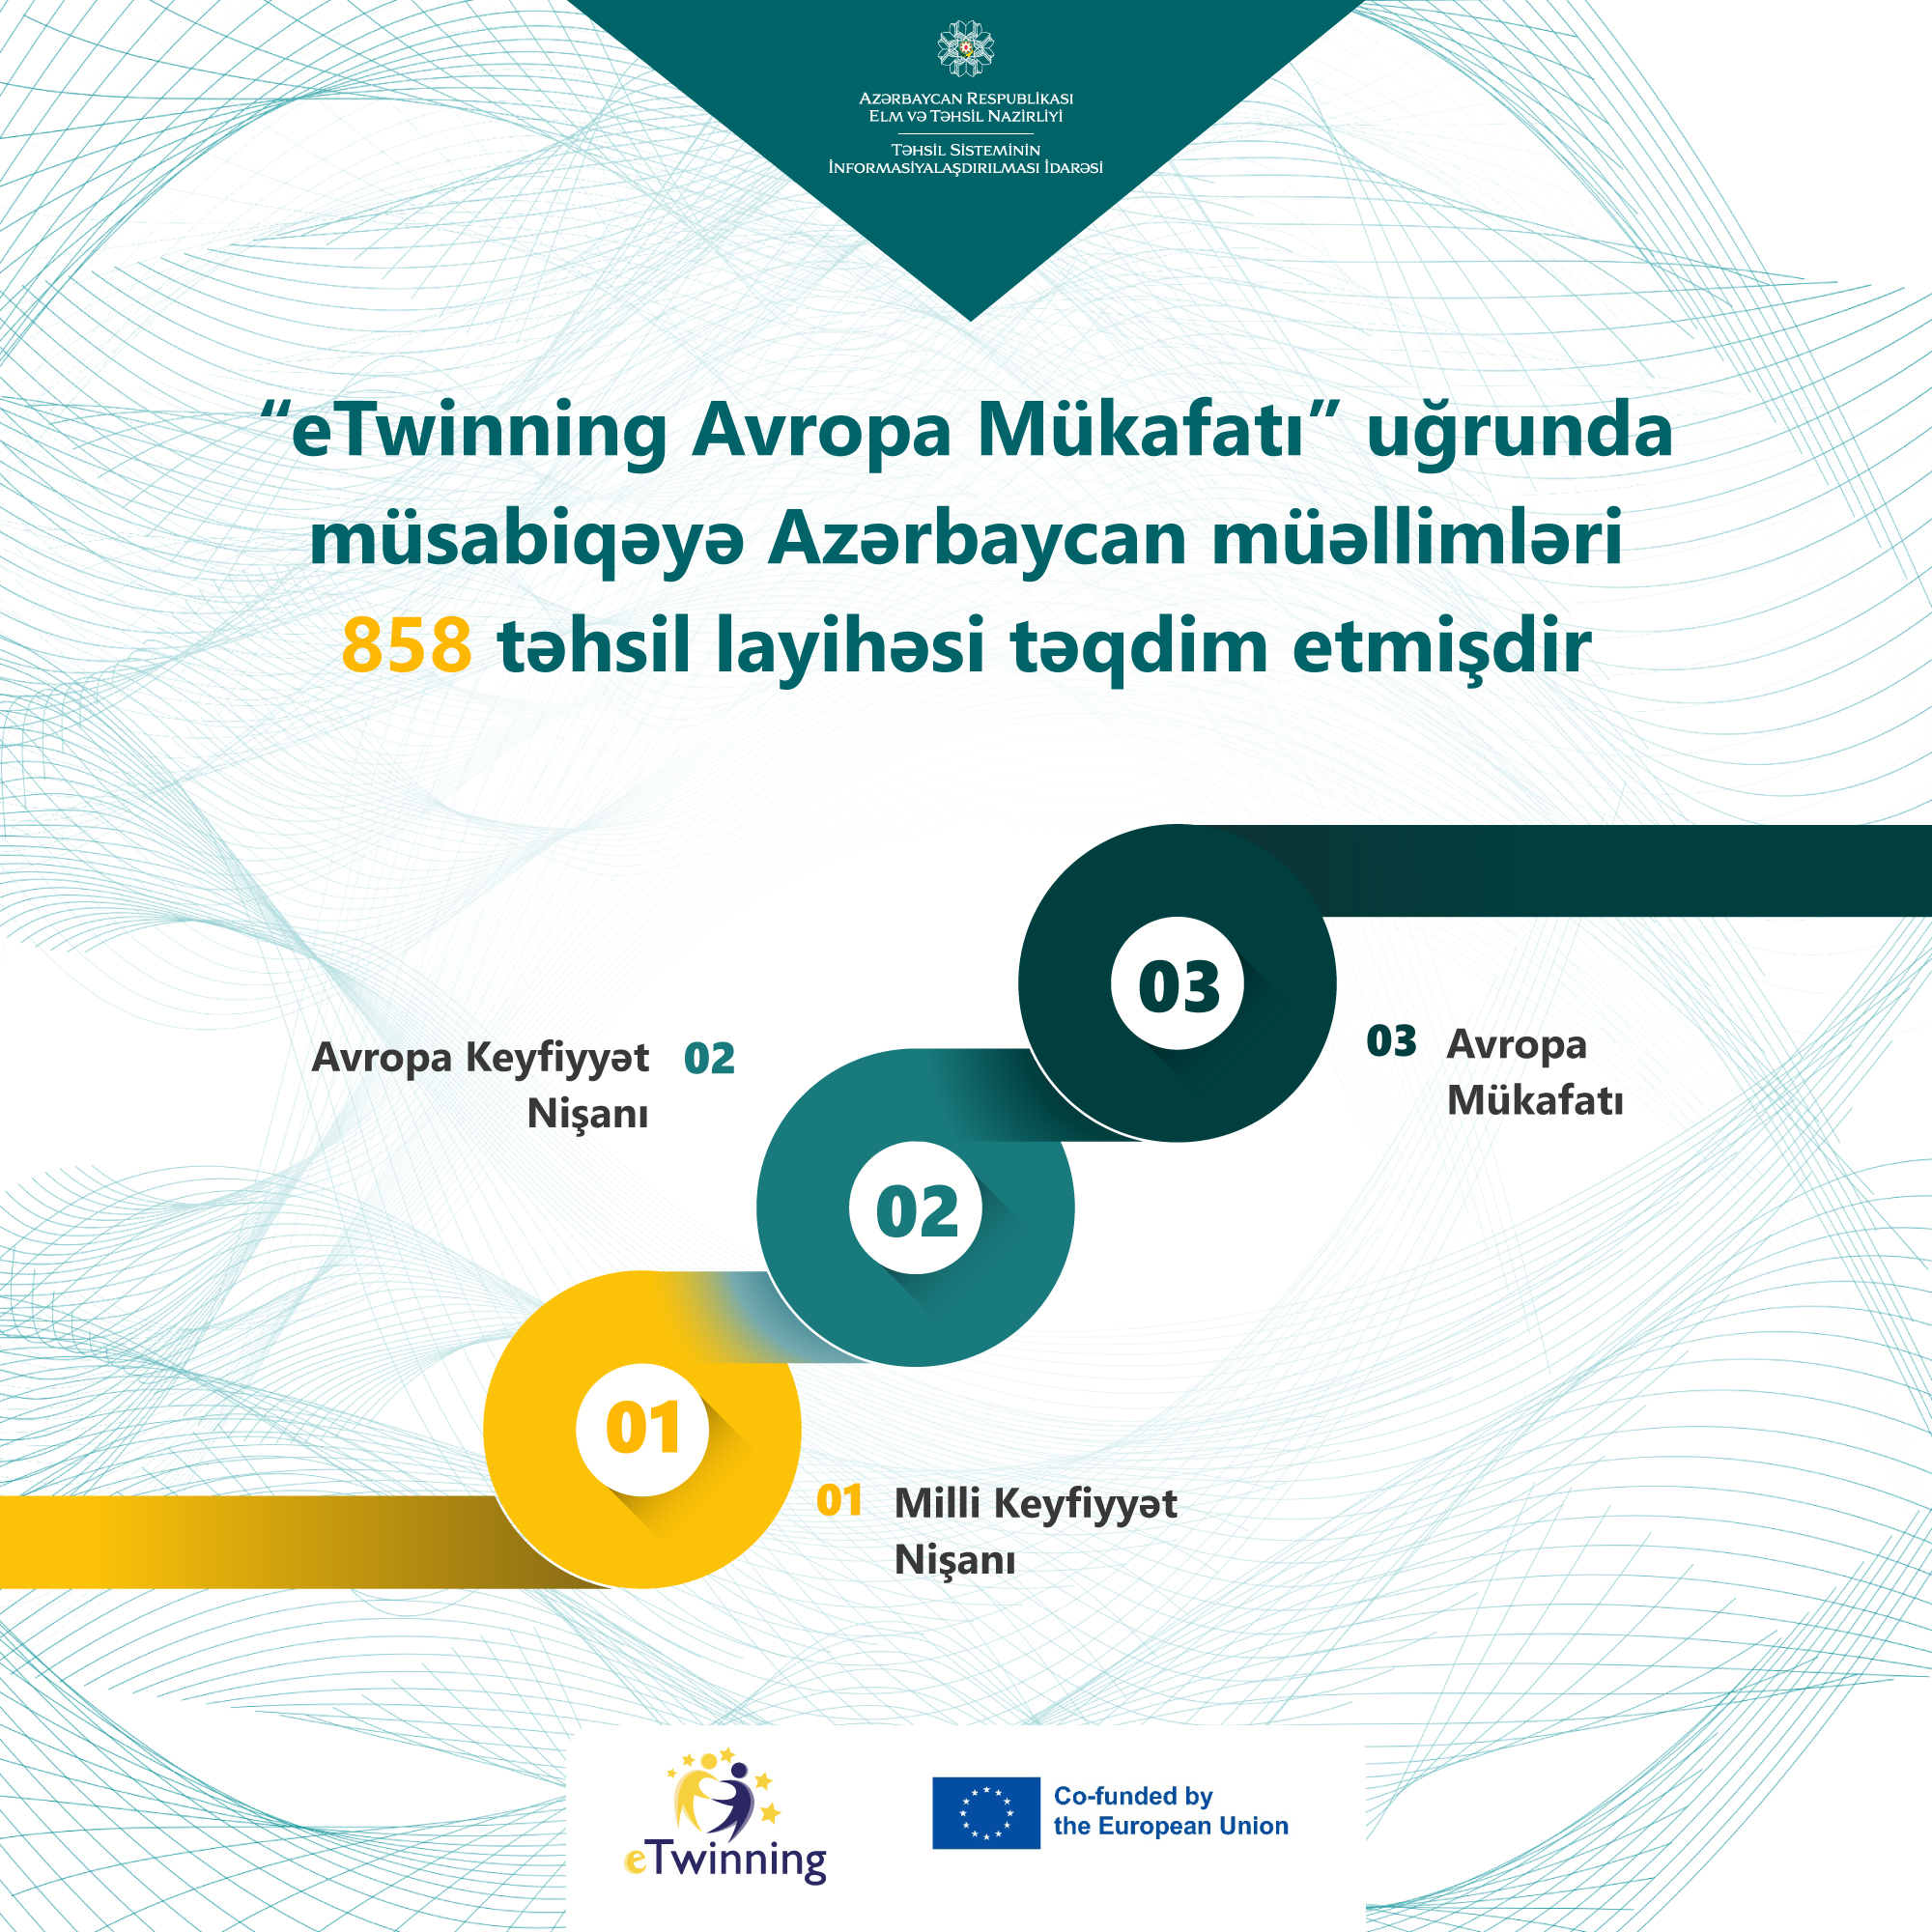 Azerbaijani teachers submitted 858 educational projects for the "eTwinning European Award".